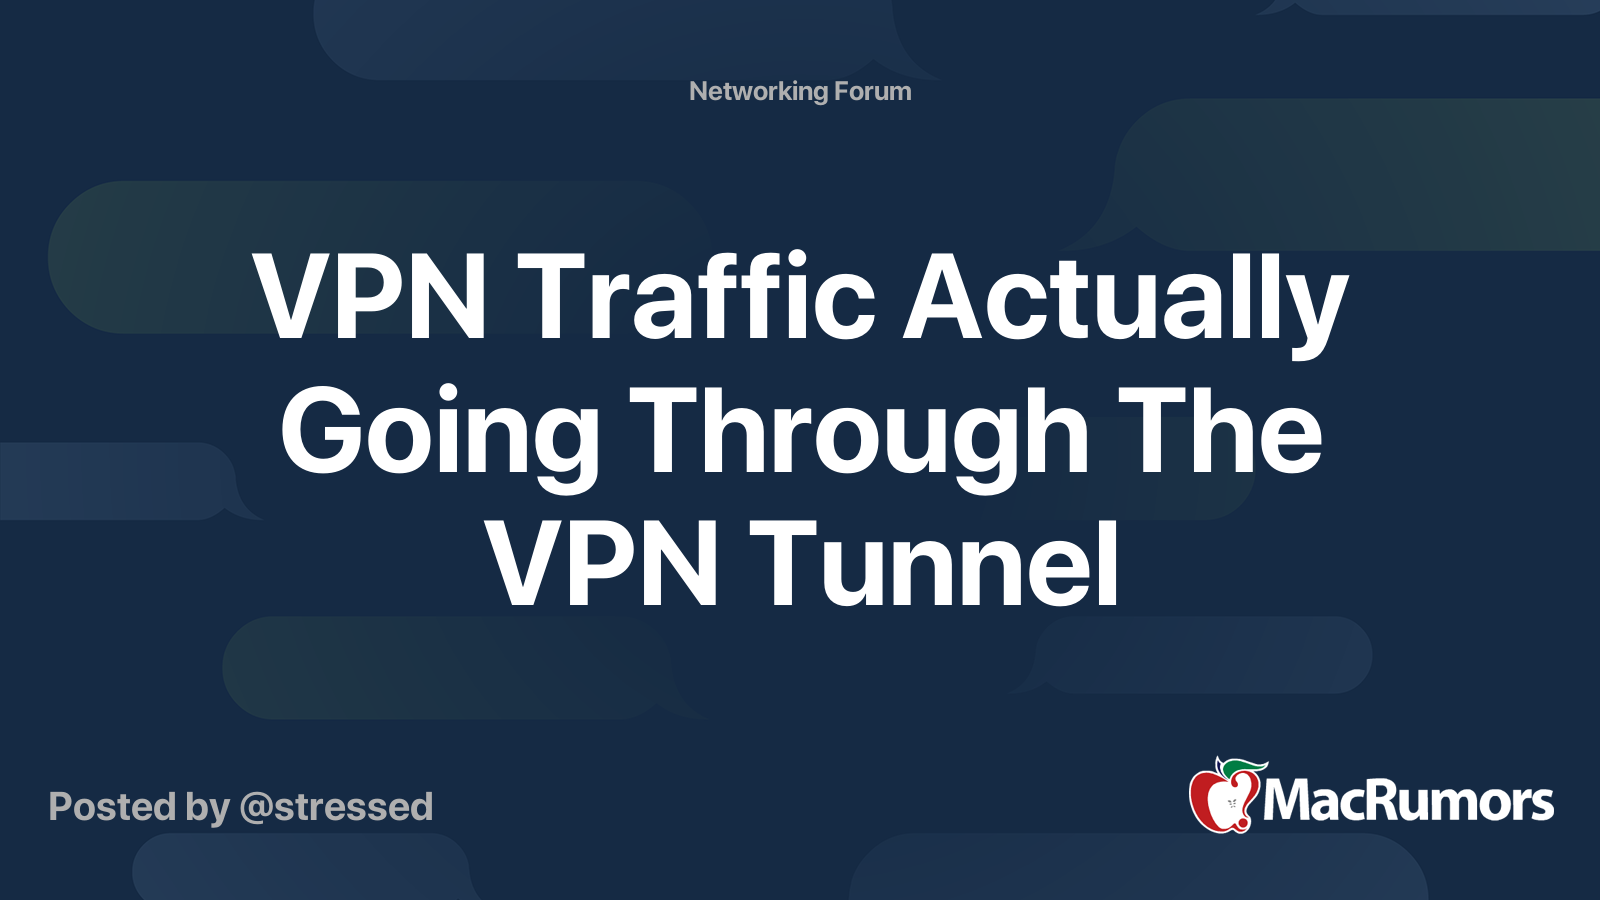 vpn tunnel freezes up